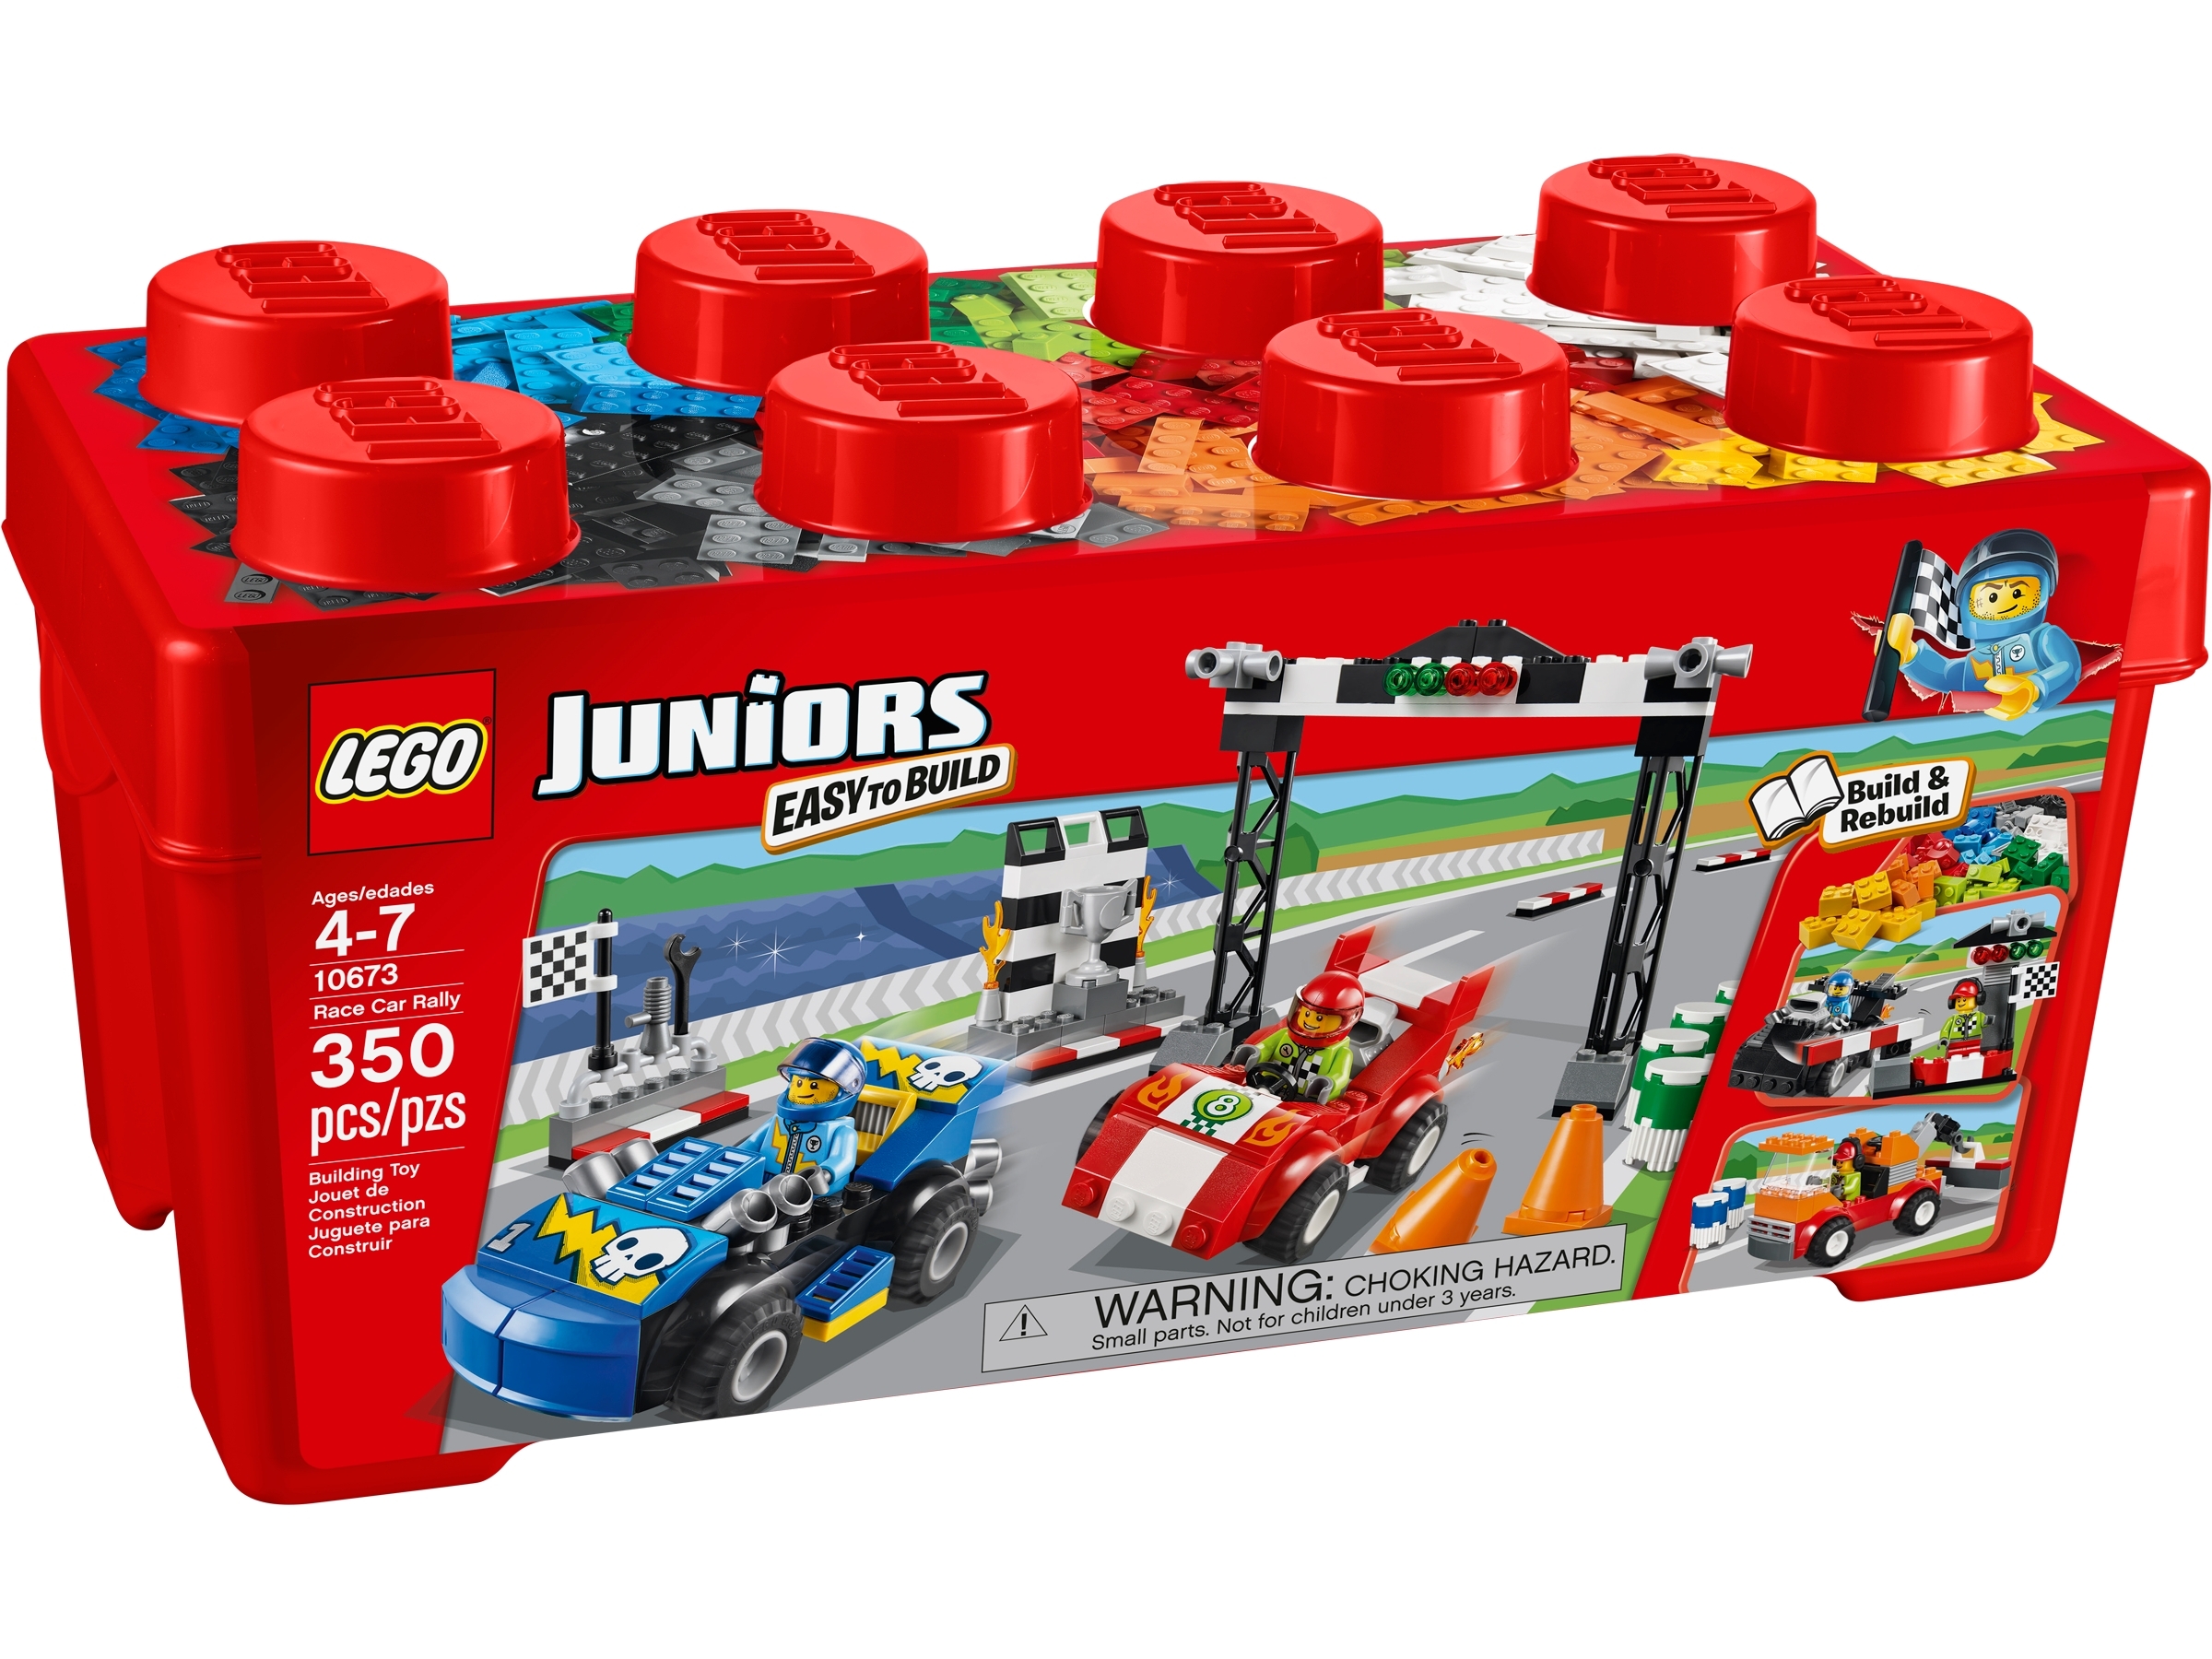 Race Car Rally 10673 Juniors Buy online at the Official LEGO® US